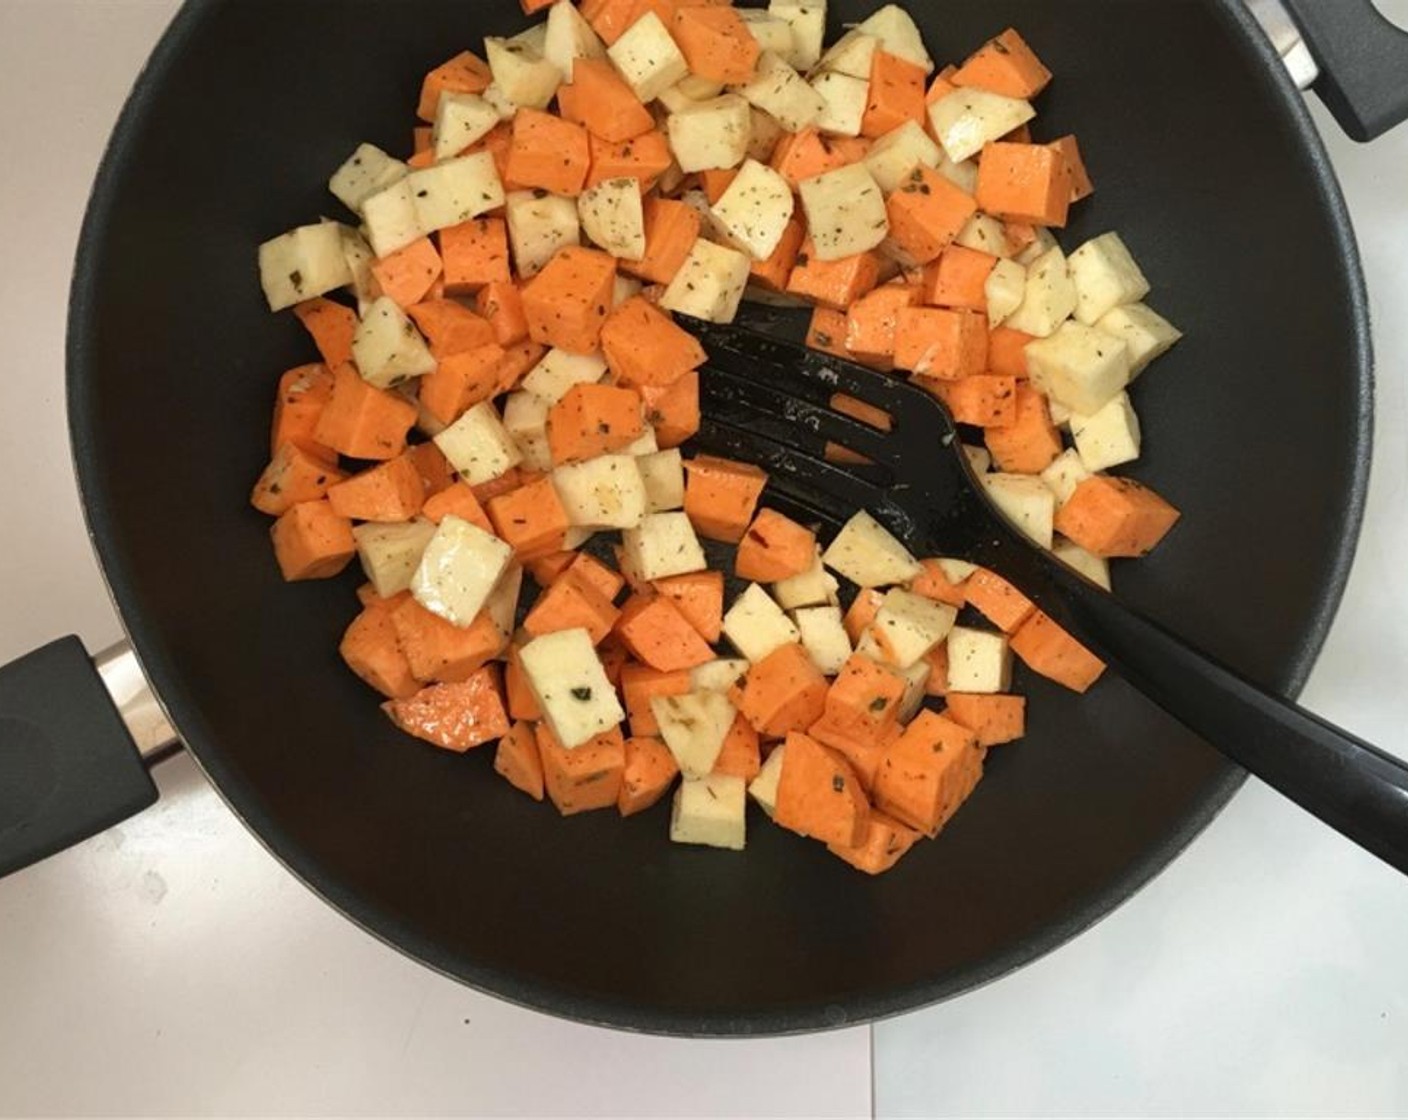 step 4 Stir the potatoes well. Place a wok or large non-stick frying pan over medium-high heat. Once the pan is hot, add the sweet potato mixture to it. Stir fry the potatoes for 12 to 15 minutes.